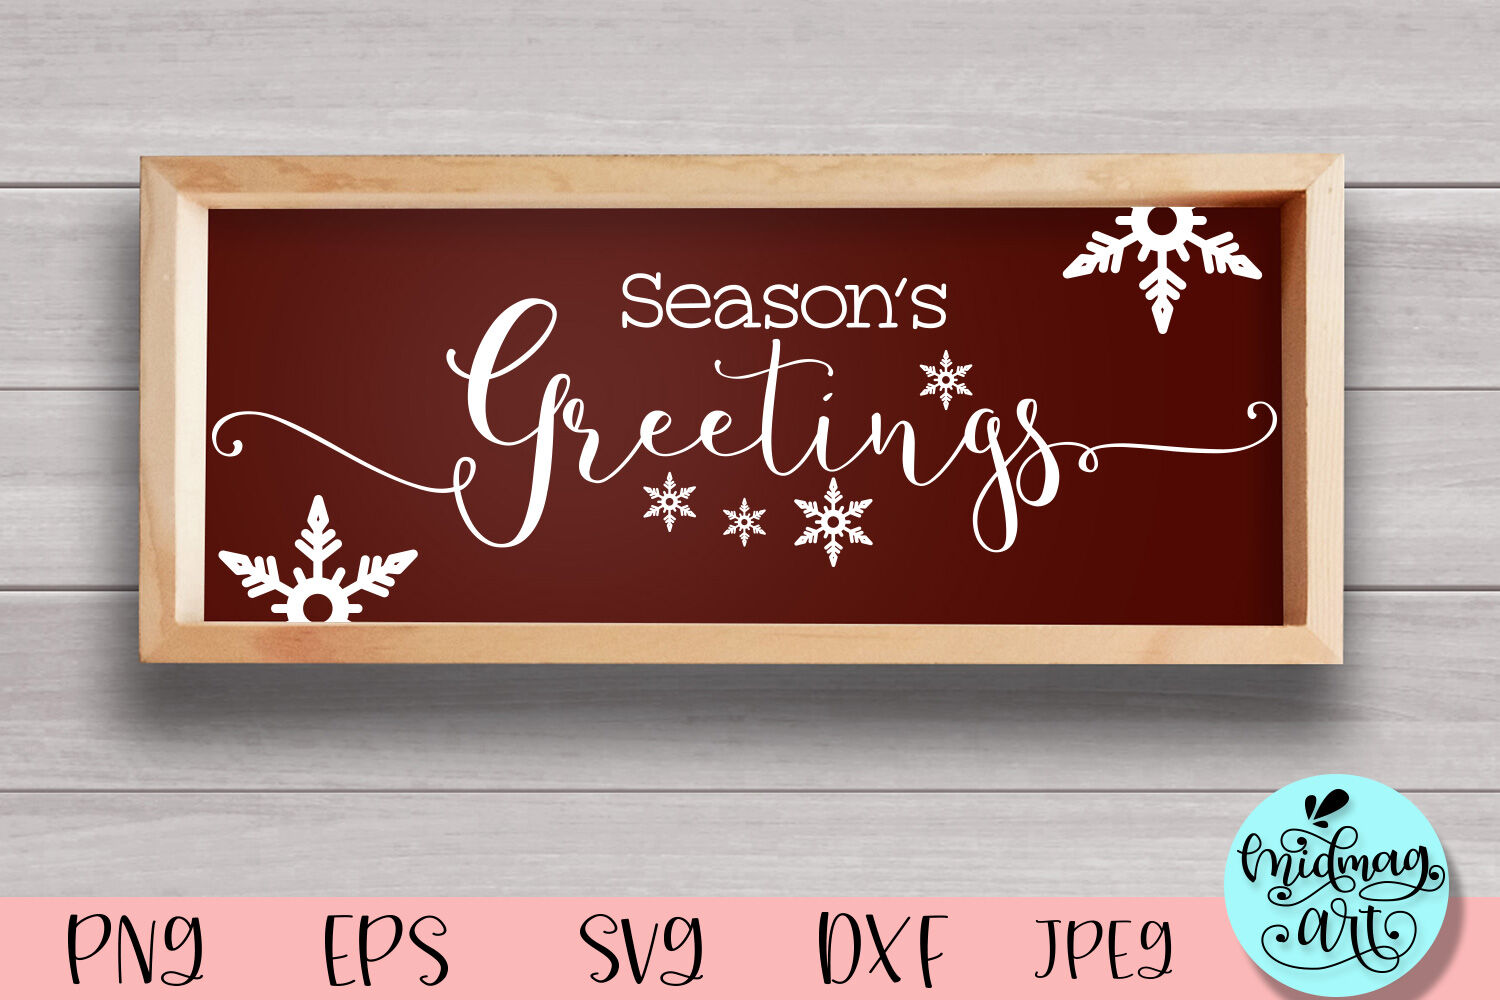 Dxf Eps Pdf Png Included Seasons Greetings Horizontal Wood Sign SVG Files for Cricut Silhouette